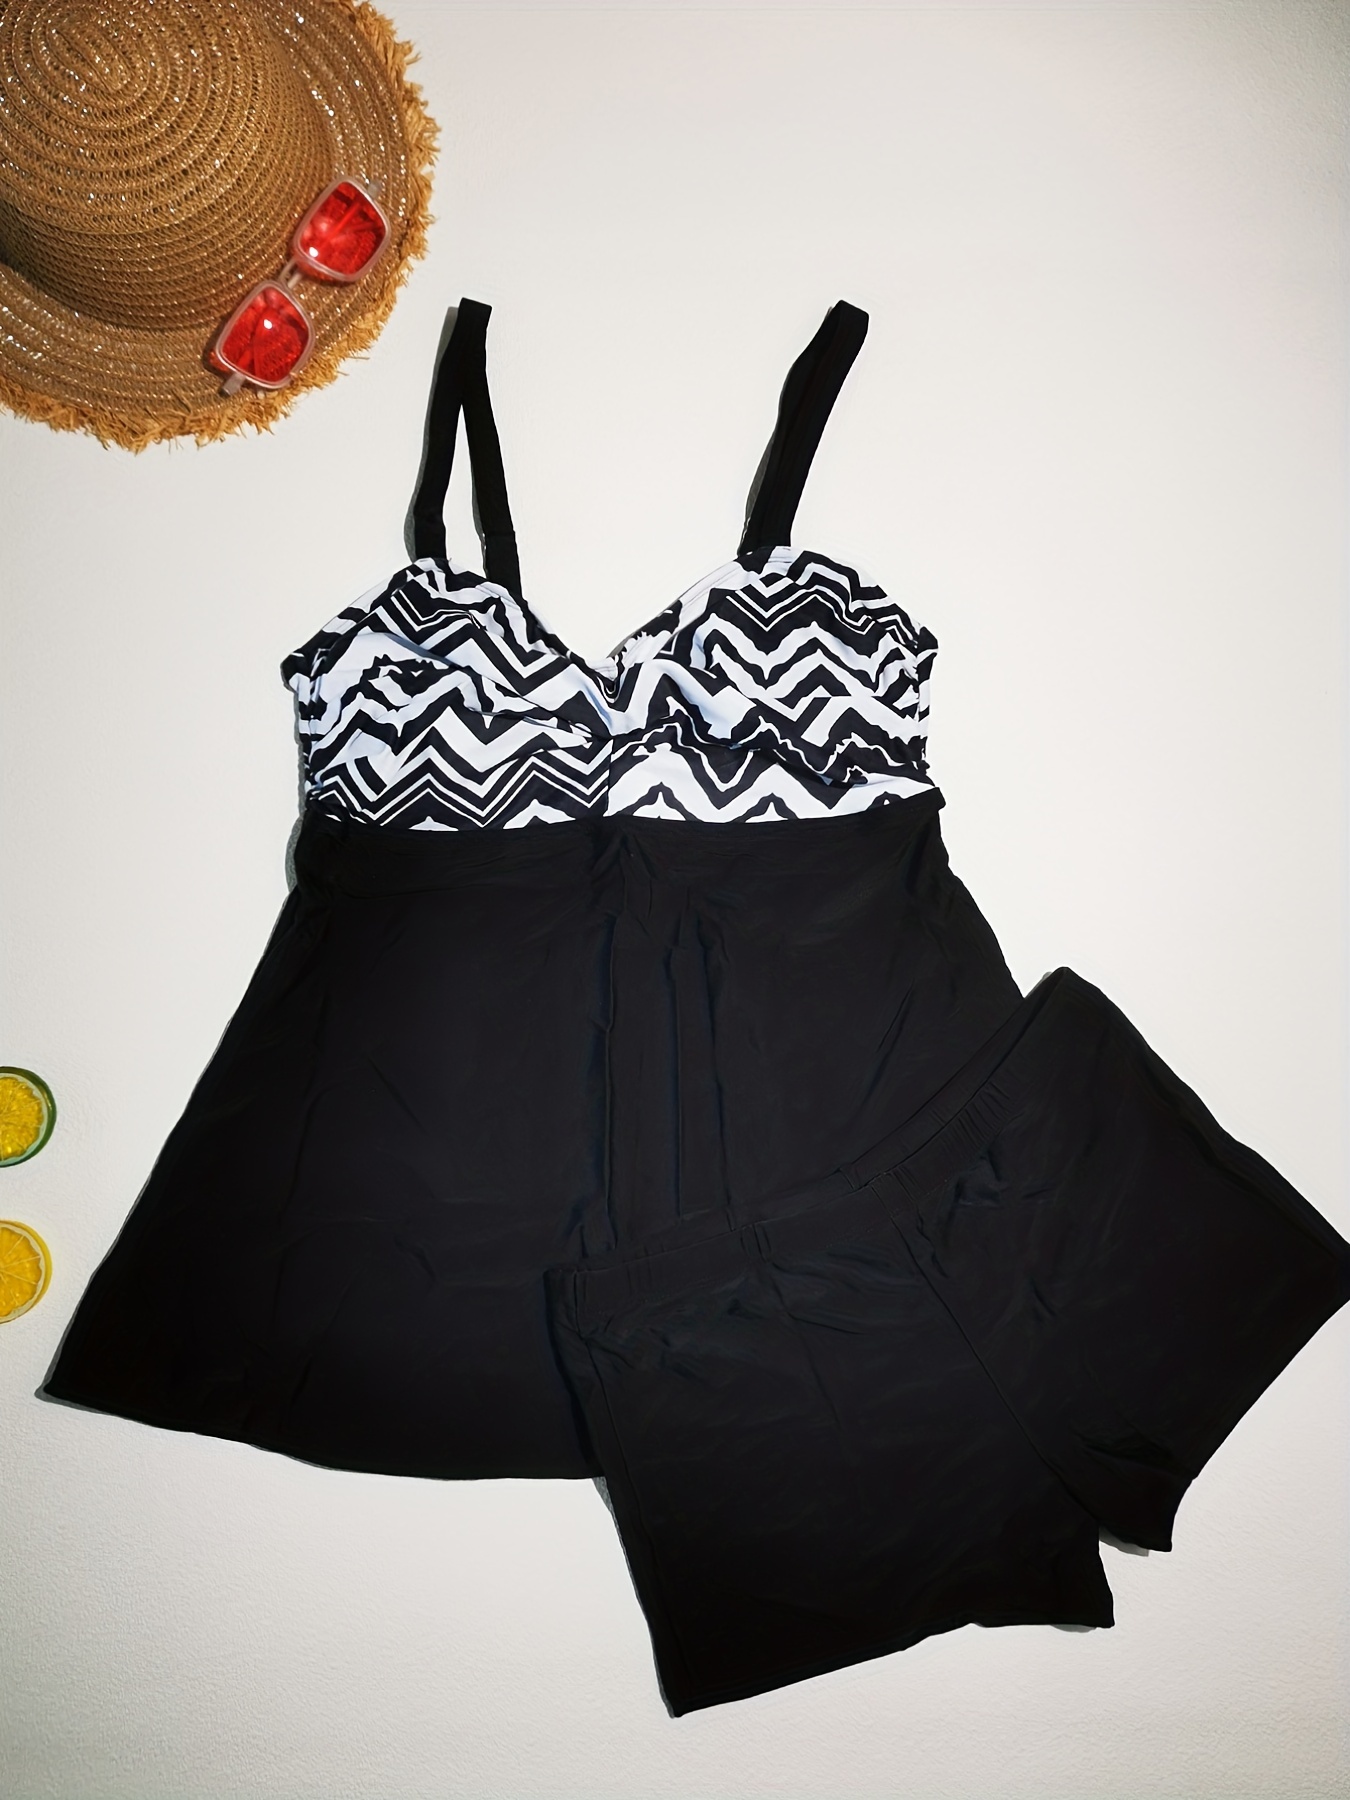 Halter swimsuit by Tom Tailor